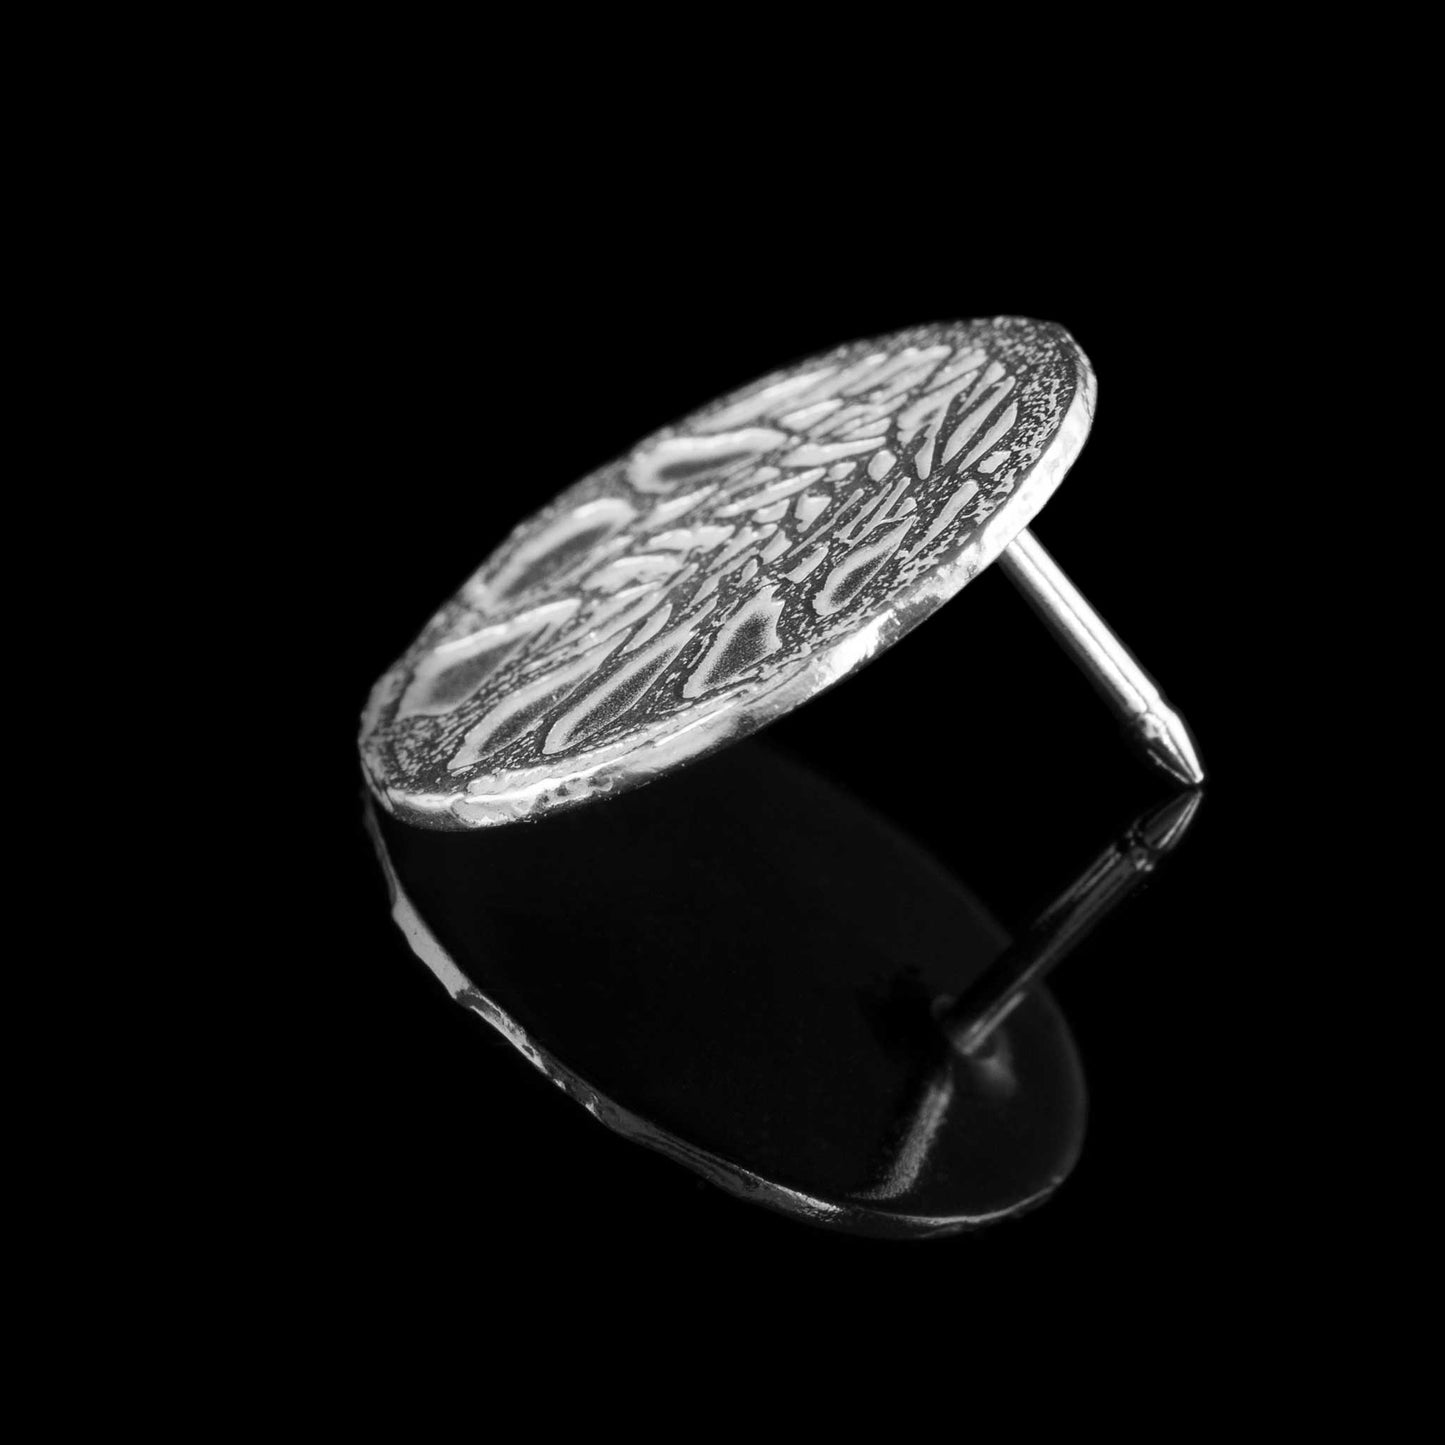 The Dark Hedges Lapel pin is made from solid silver and has a lovely tree design. Made in UK by NI Silver